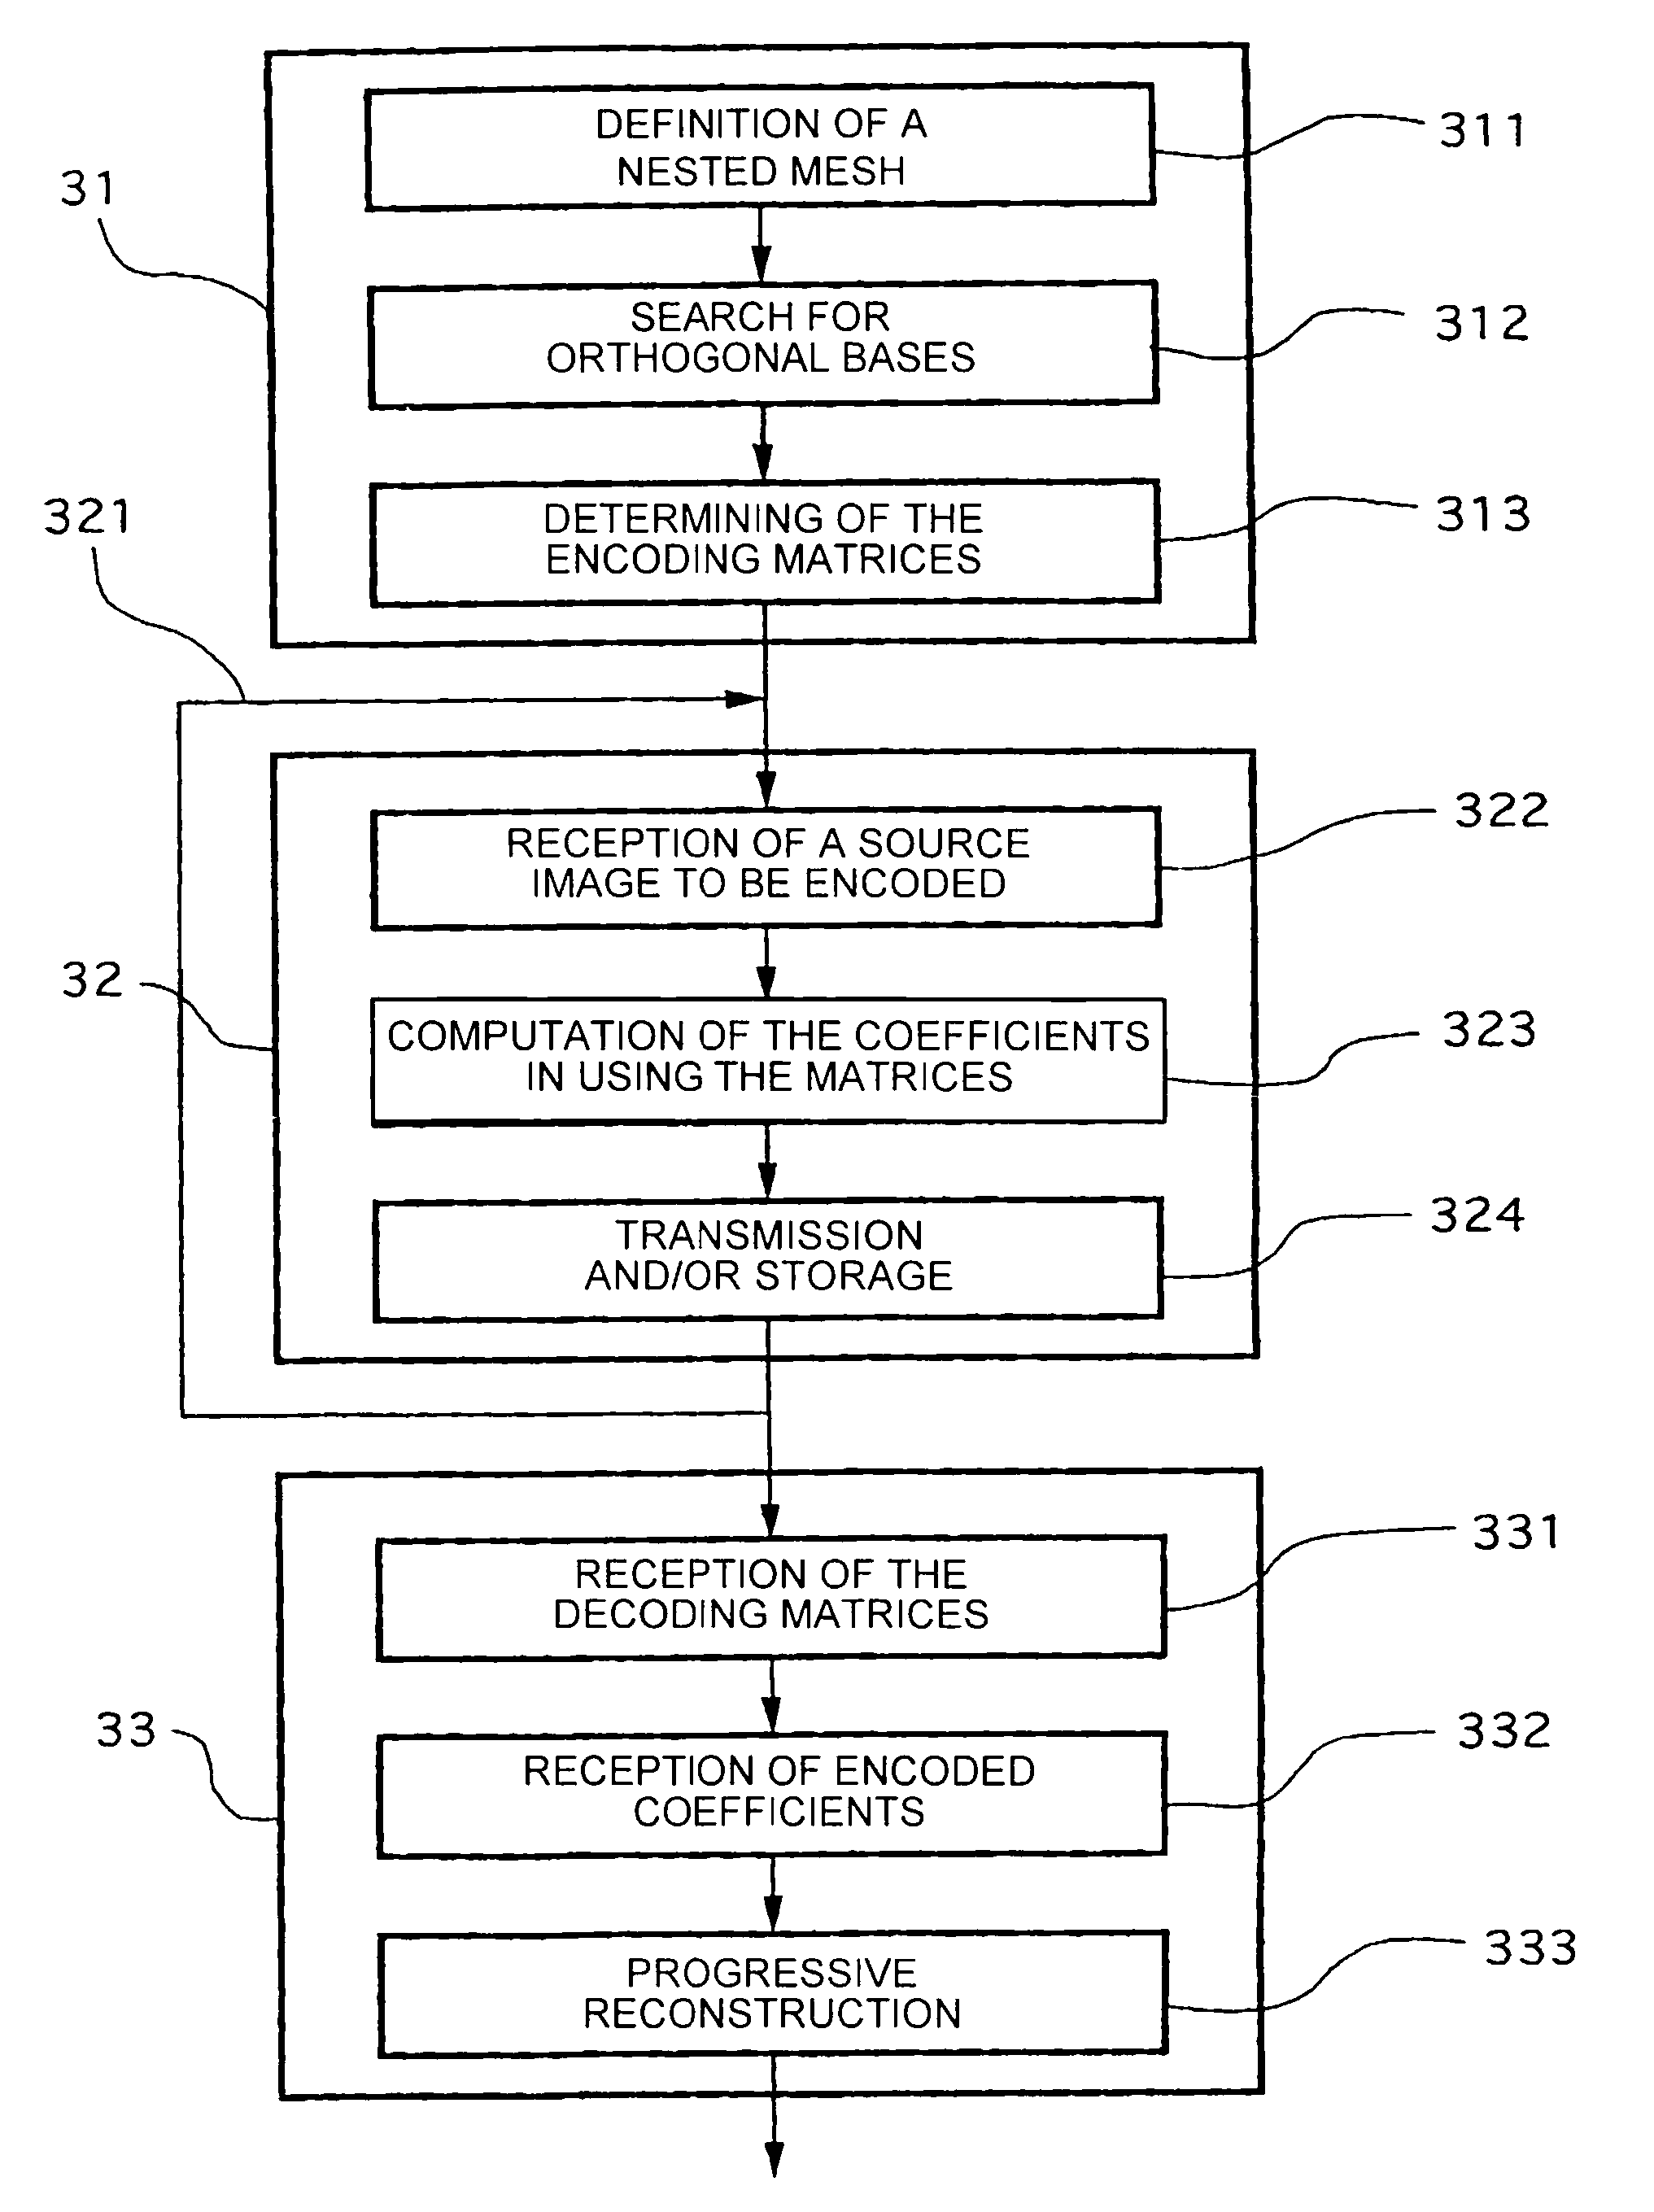 Methods and devices for encoding and decoding images using nested meshes, programme, signal and corresponding uses